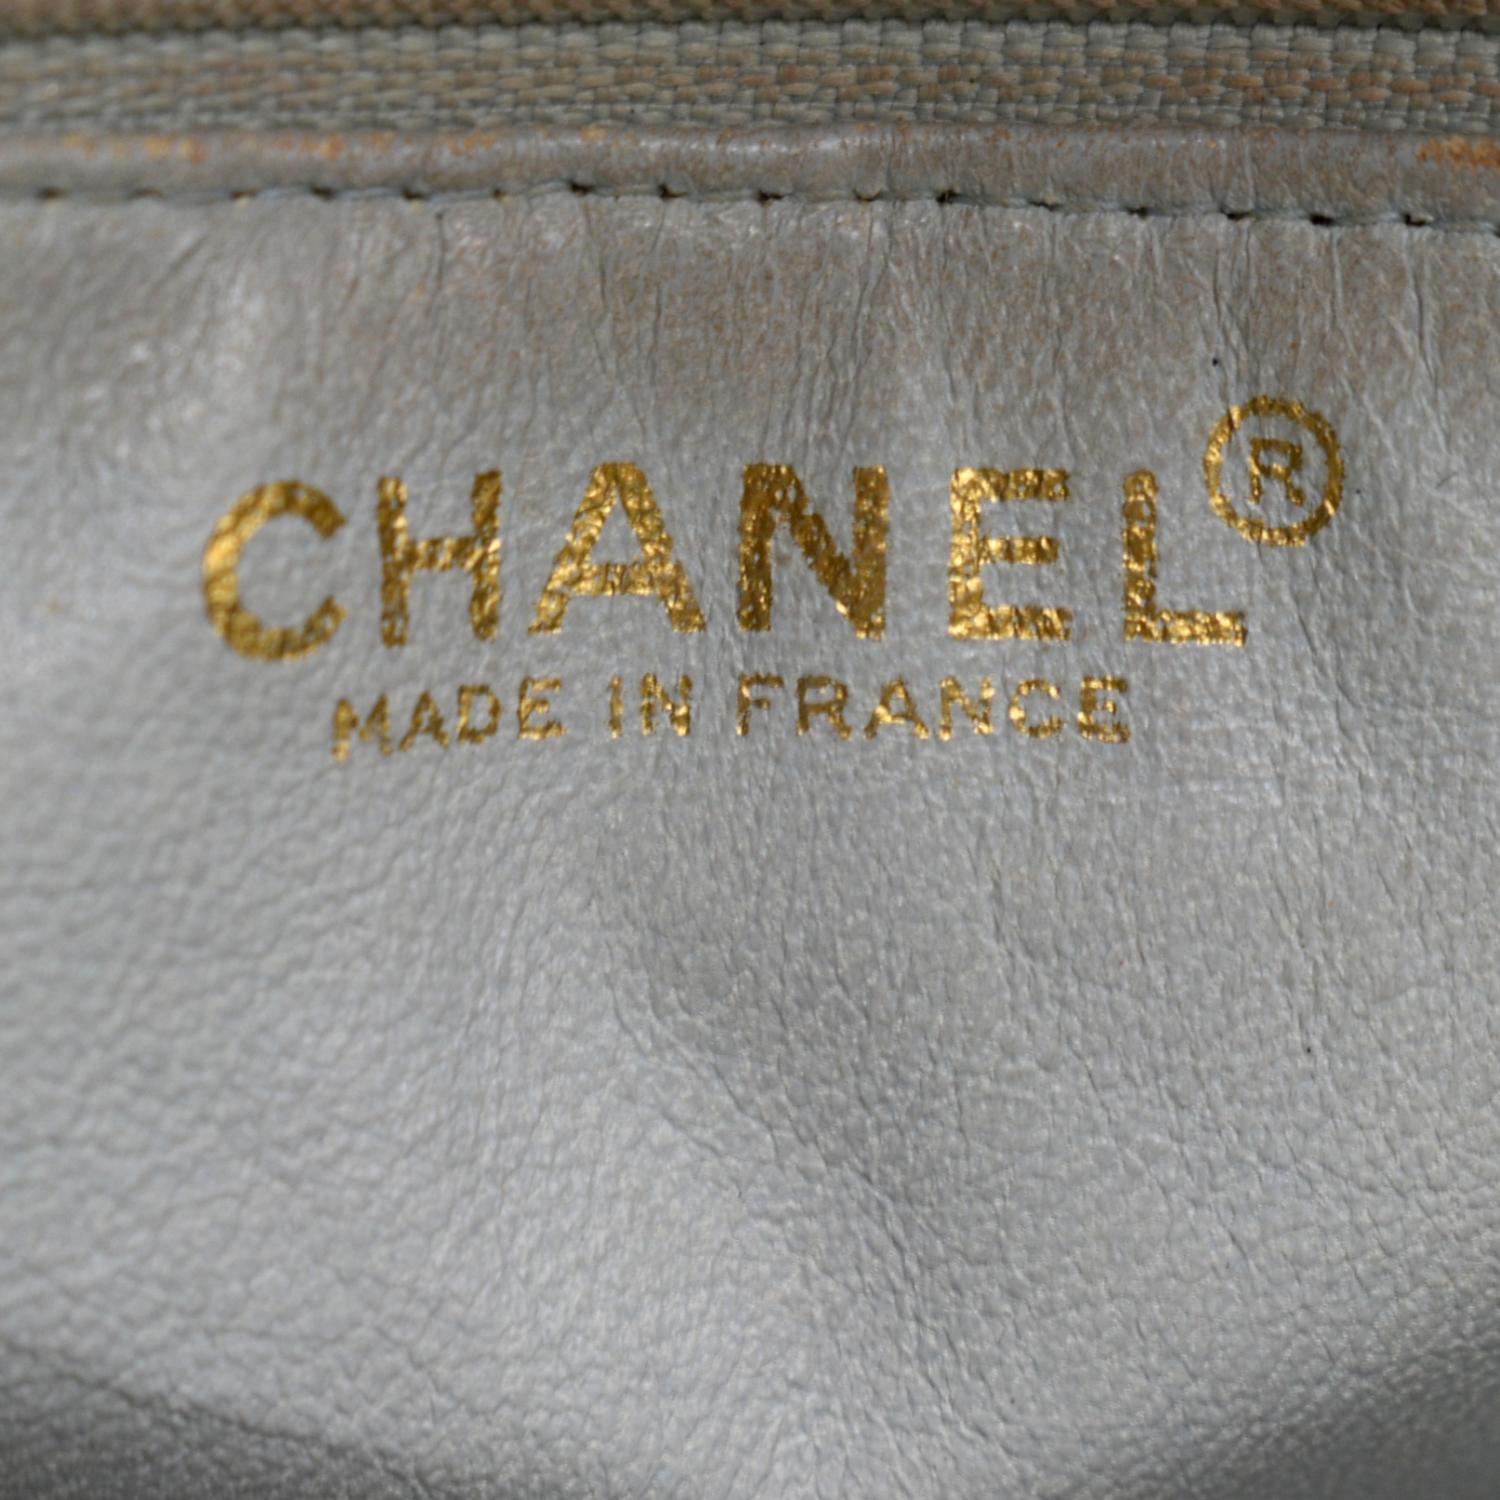 CHANEL Pre-Owned 2003 Medallion Tote Bag - Farfetch